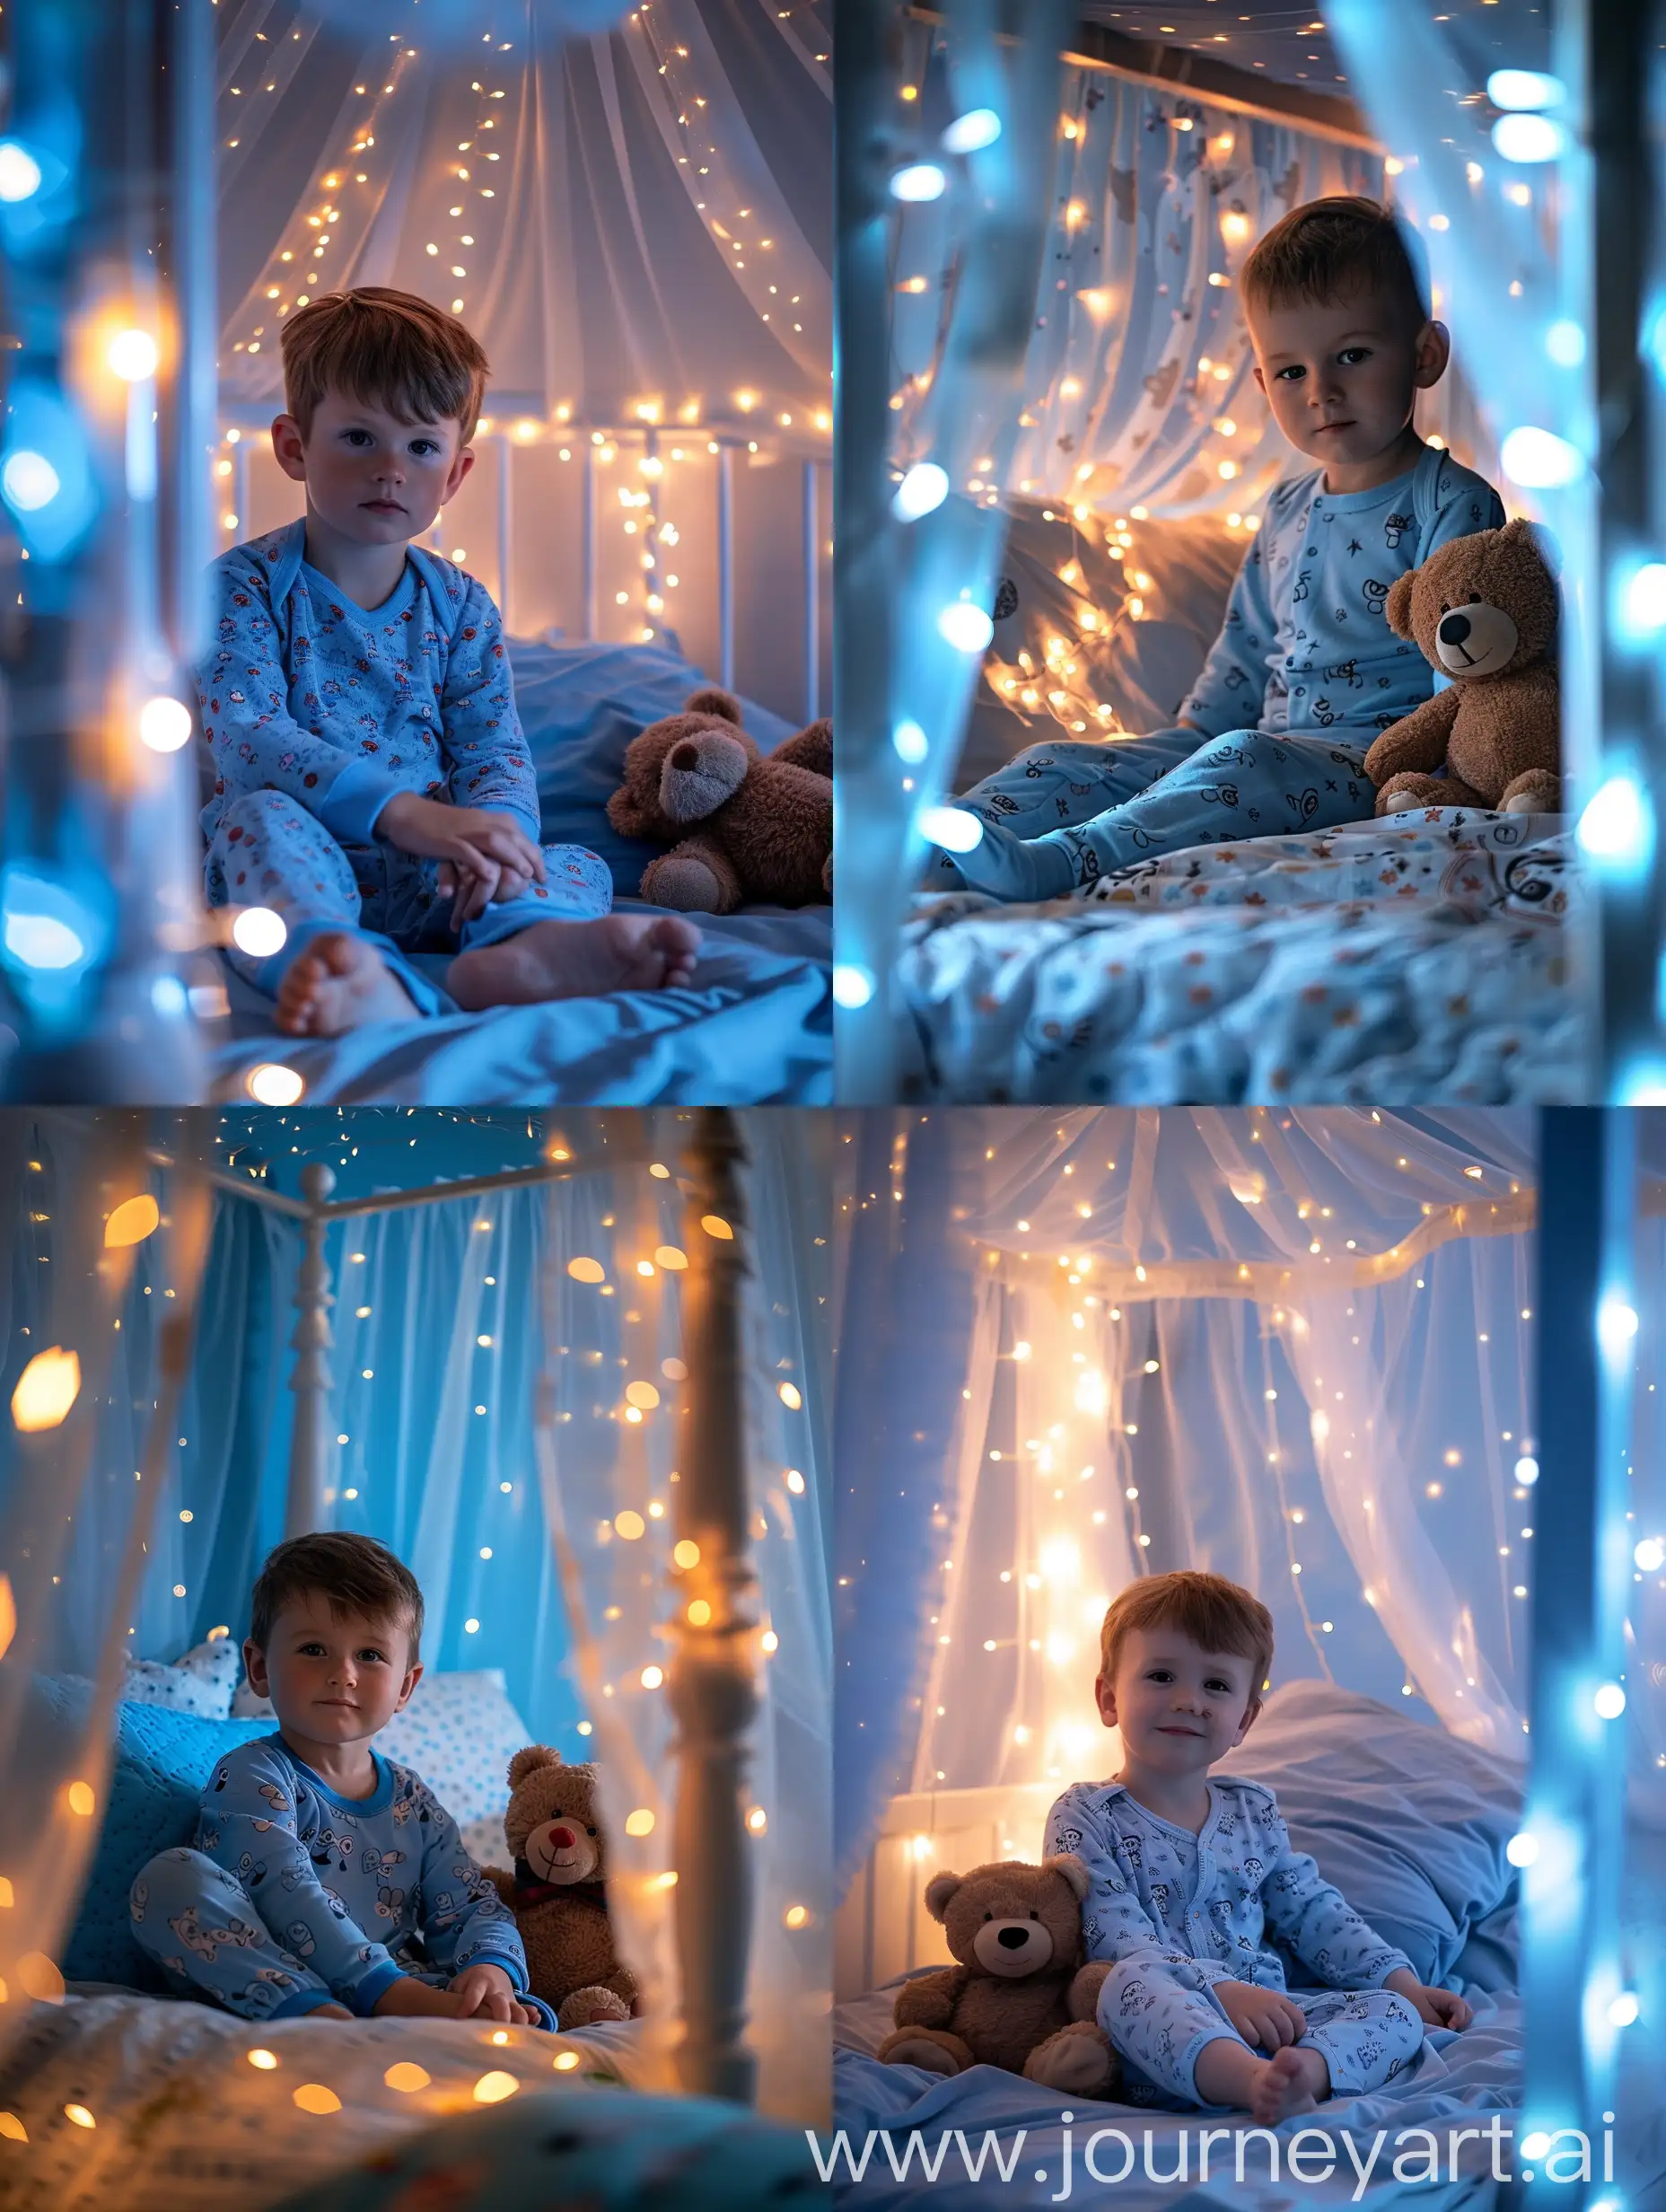 A little boy in pajamas is sitting on a four-poster bed, the canopy is glowing with lights, next to a teddy bear, close-up, realistic photo, hyperrealism, face is clearly visible, looking at the camera, photo in blue and white, close-up photo, light photo